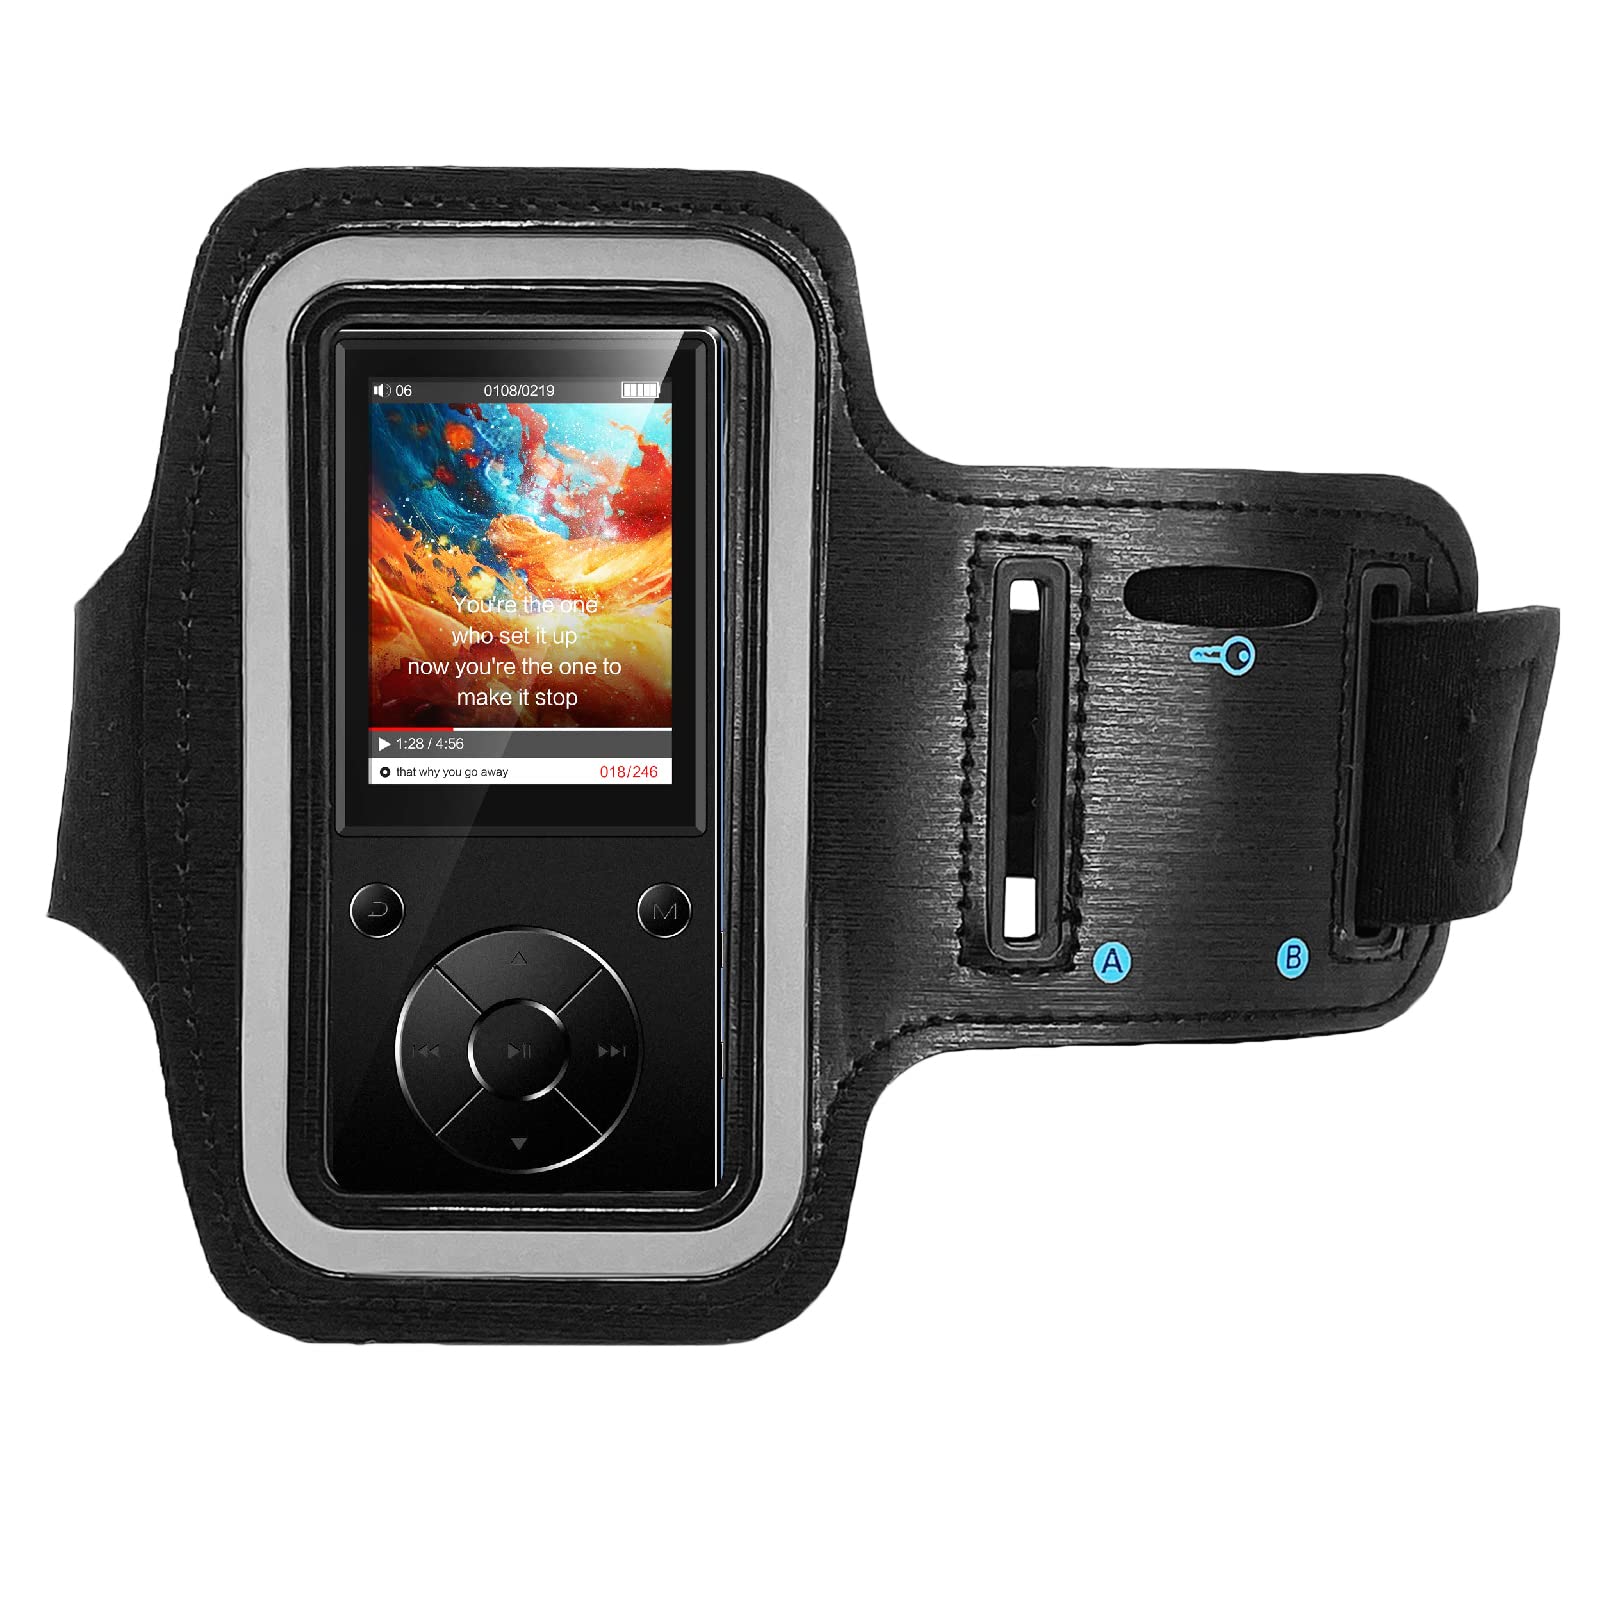 MP3 Player Running Exercise Armband, Adjustable Length Arm Band ,  Waterproof, Built-in Key Pocket, Headphone Slot, Sports Armband Protector  for MP3 Players from Agptek, Aiworth, Hotechs